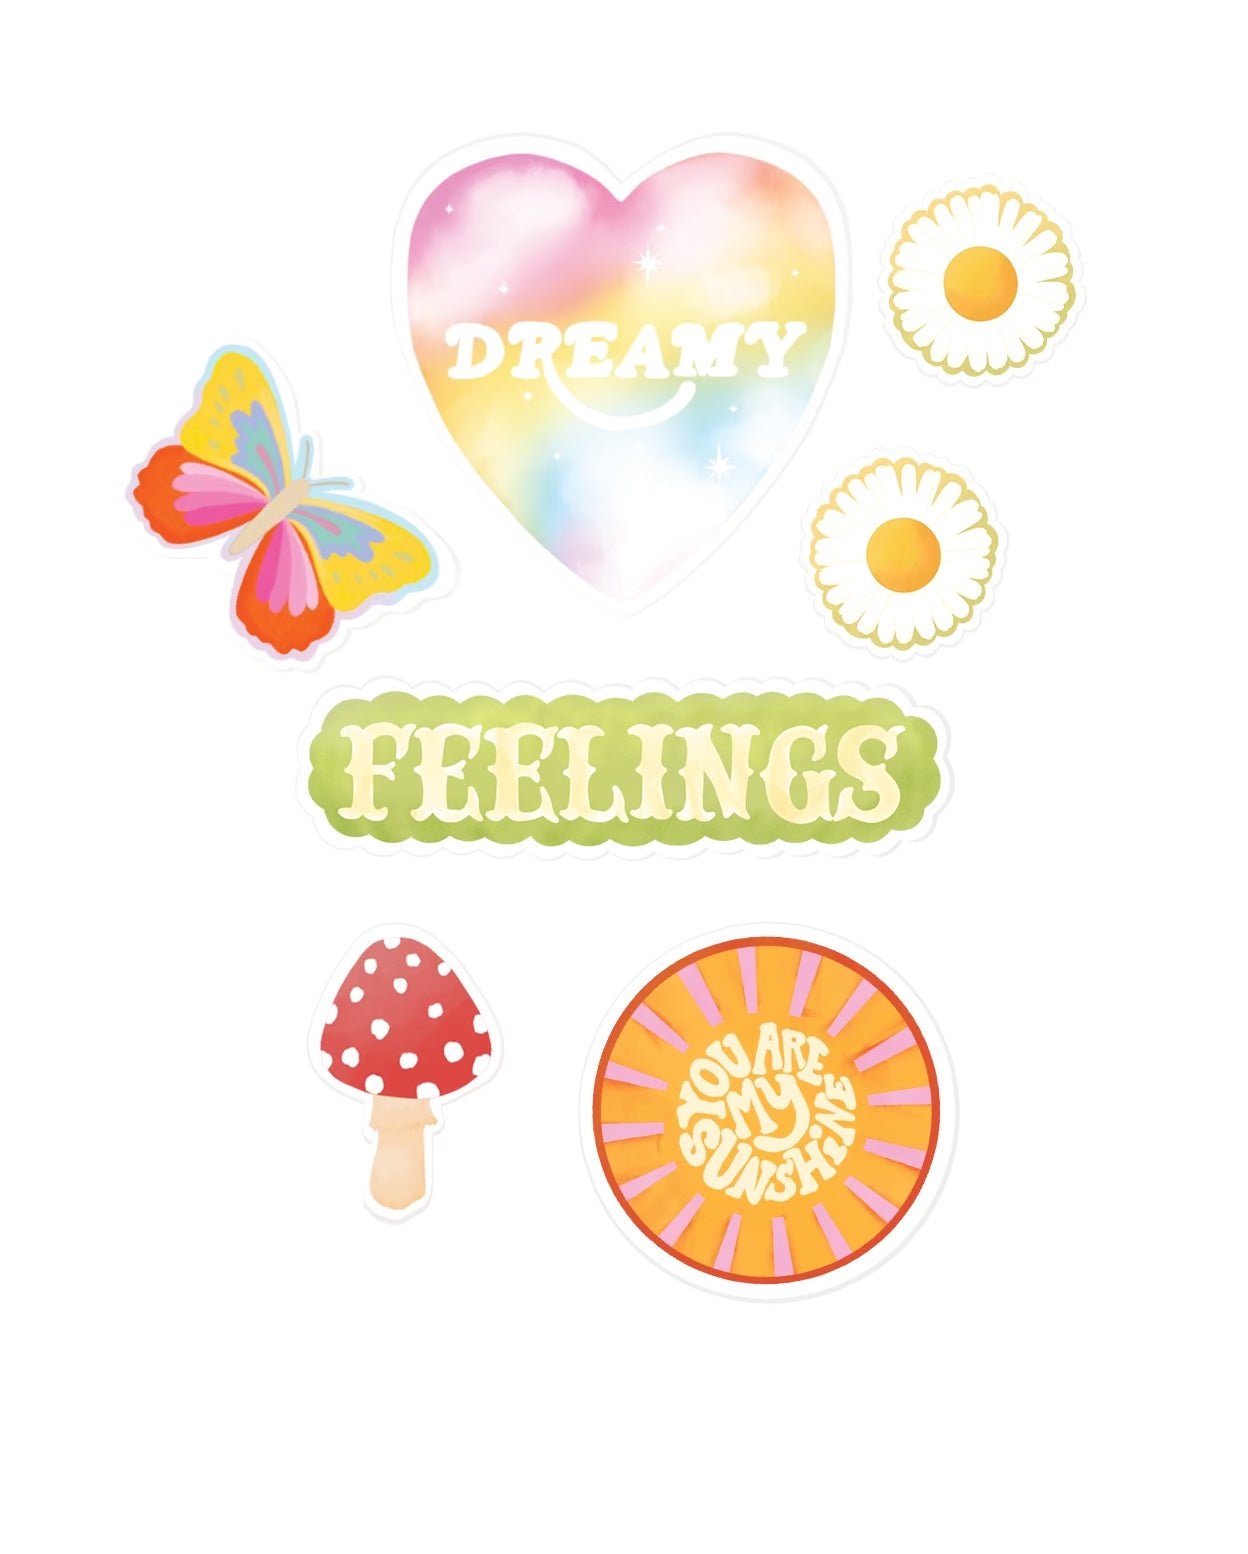 6 new Adelfi stickers: colorful butterfly, the word &#39;Feelings&#39; in all caps, two daisies, the words &#39;you are my sunshine&#39; in a sun, red mushroom, and the word &#39;Dreamy&#39; in a heart